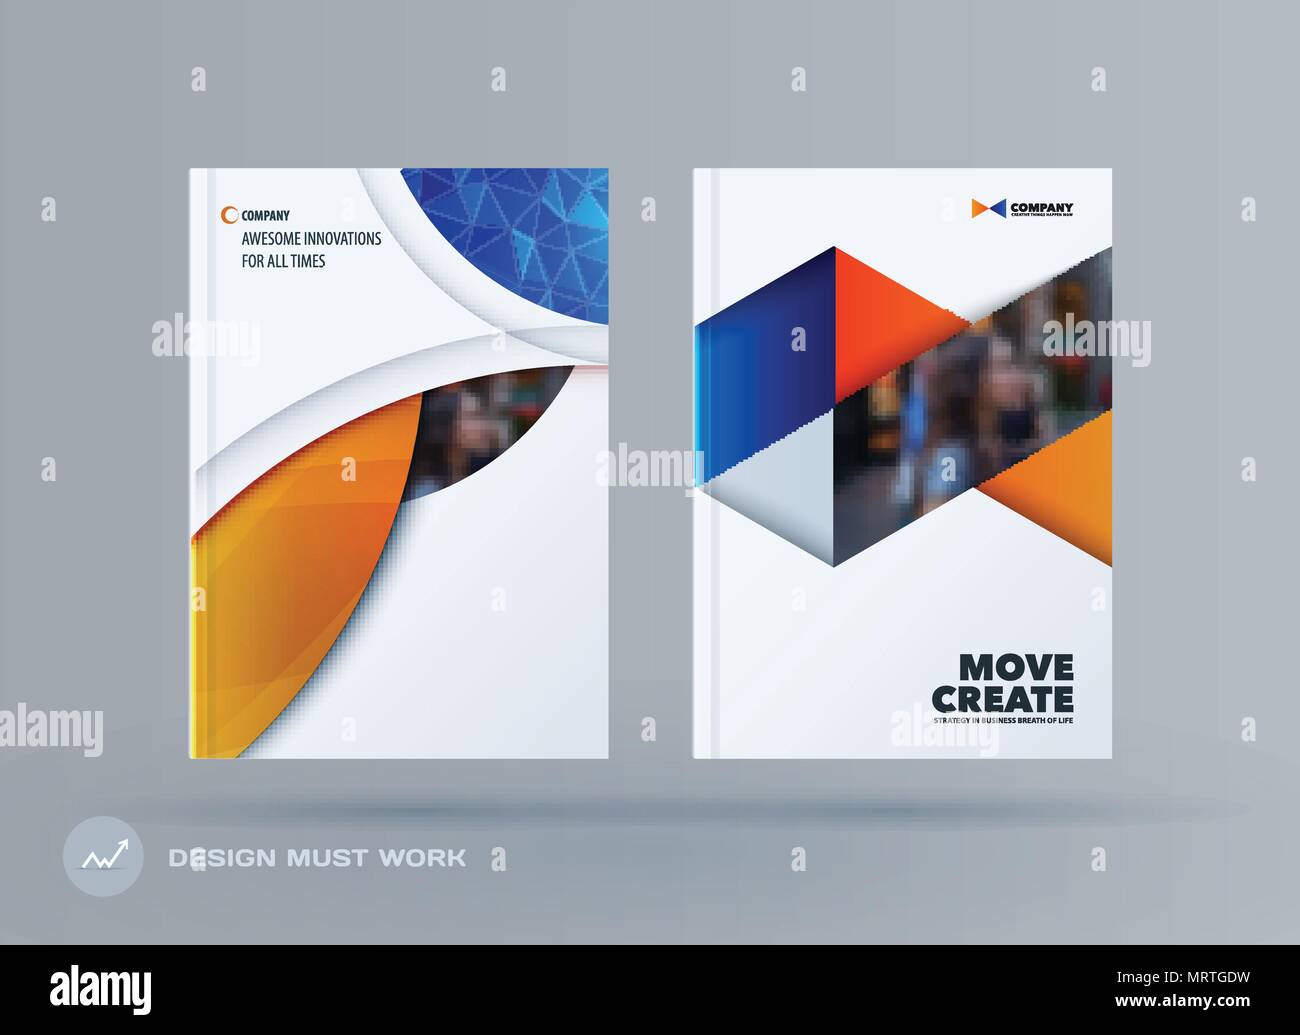 Brochure design round template. Colourful modern abstract set, annual report with circle for branding. Stock Vector